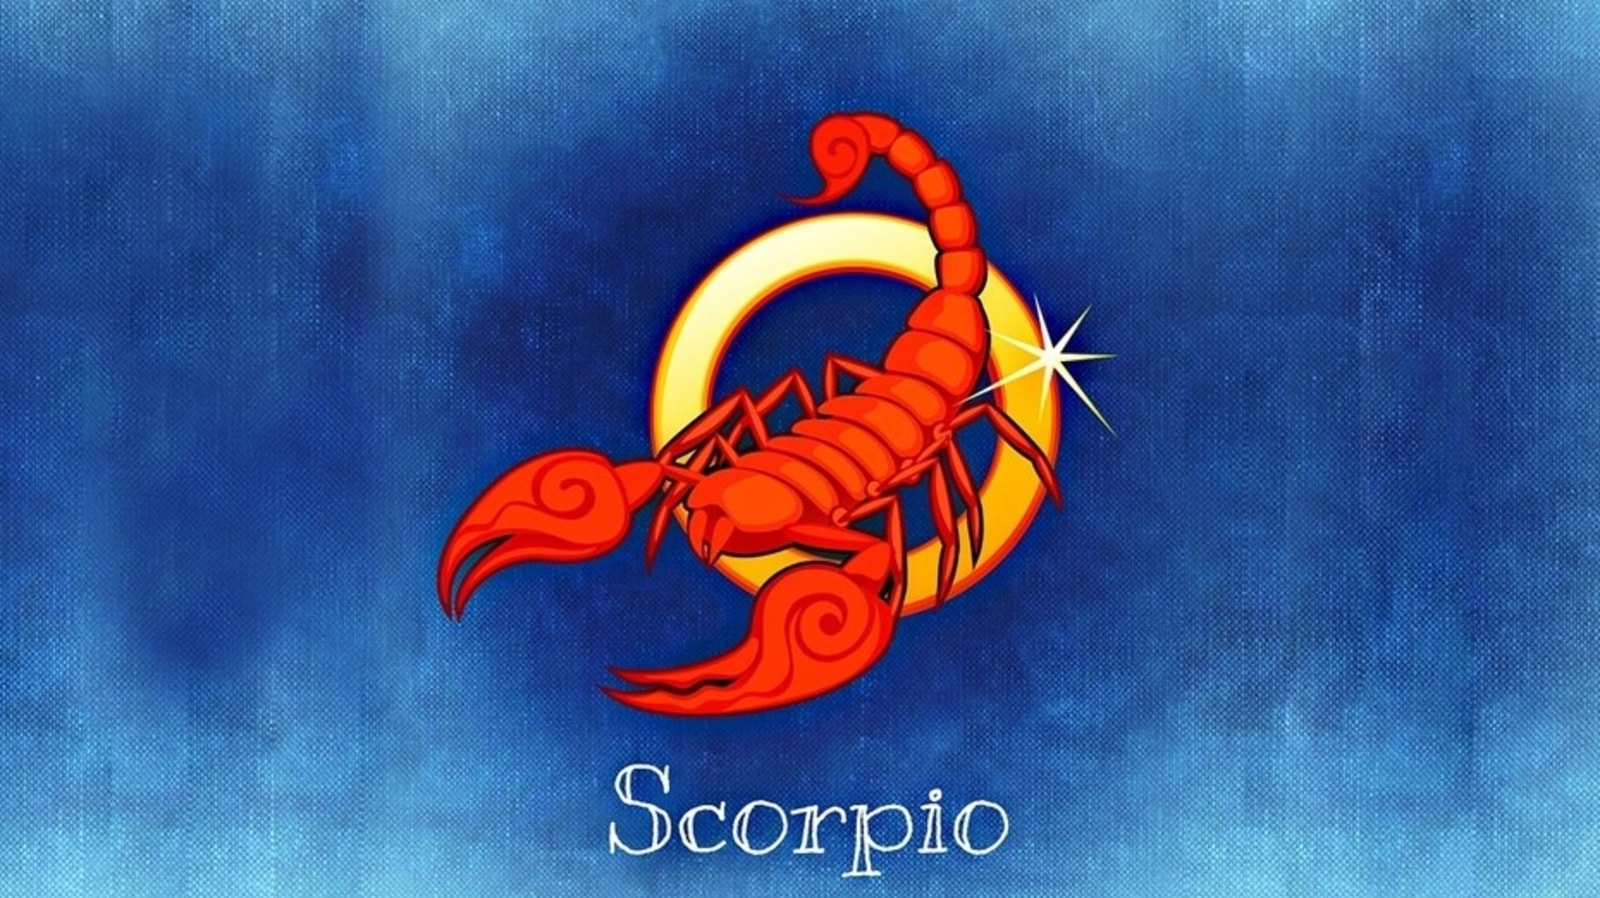 Scorpio Daily Horoscope Astrological Prediction for August 24